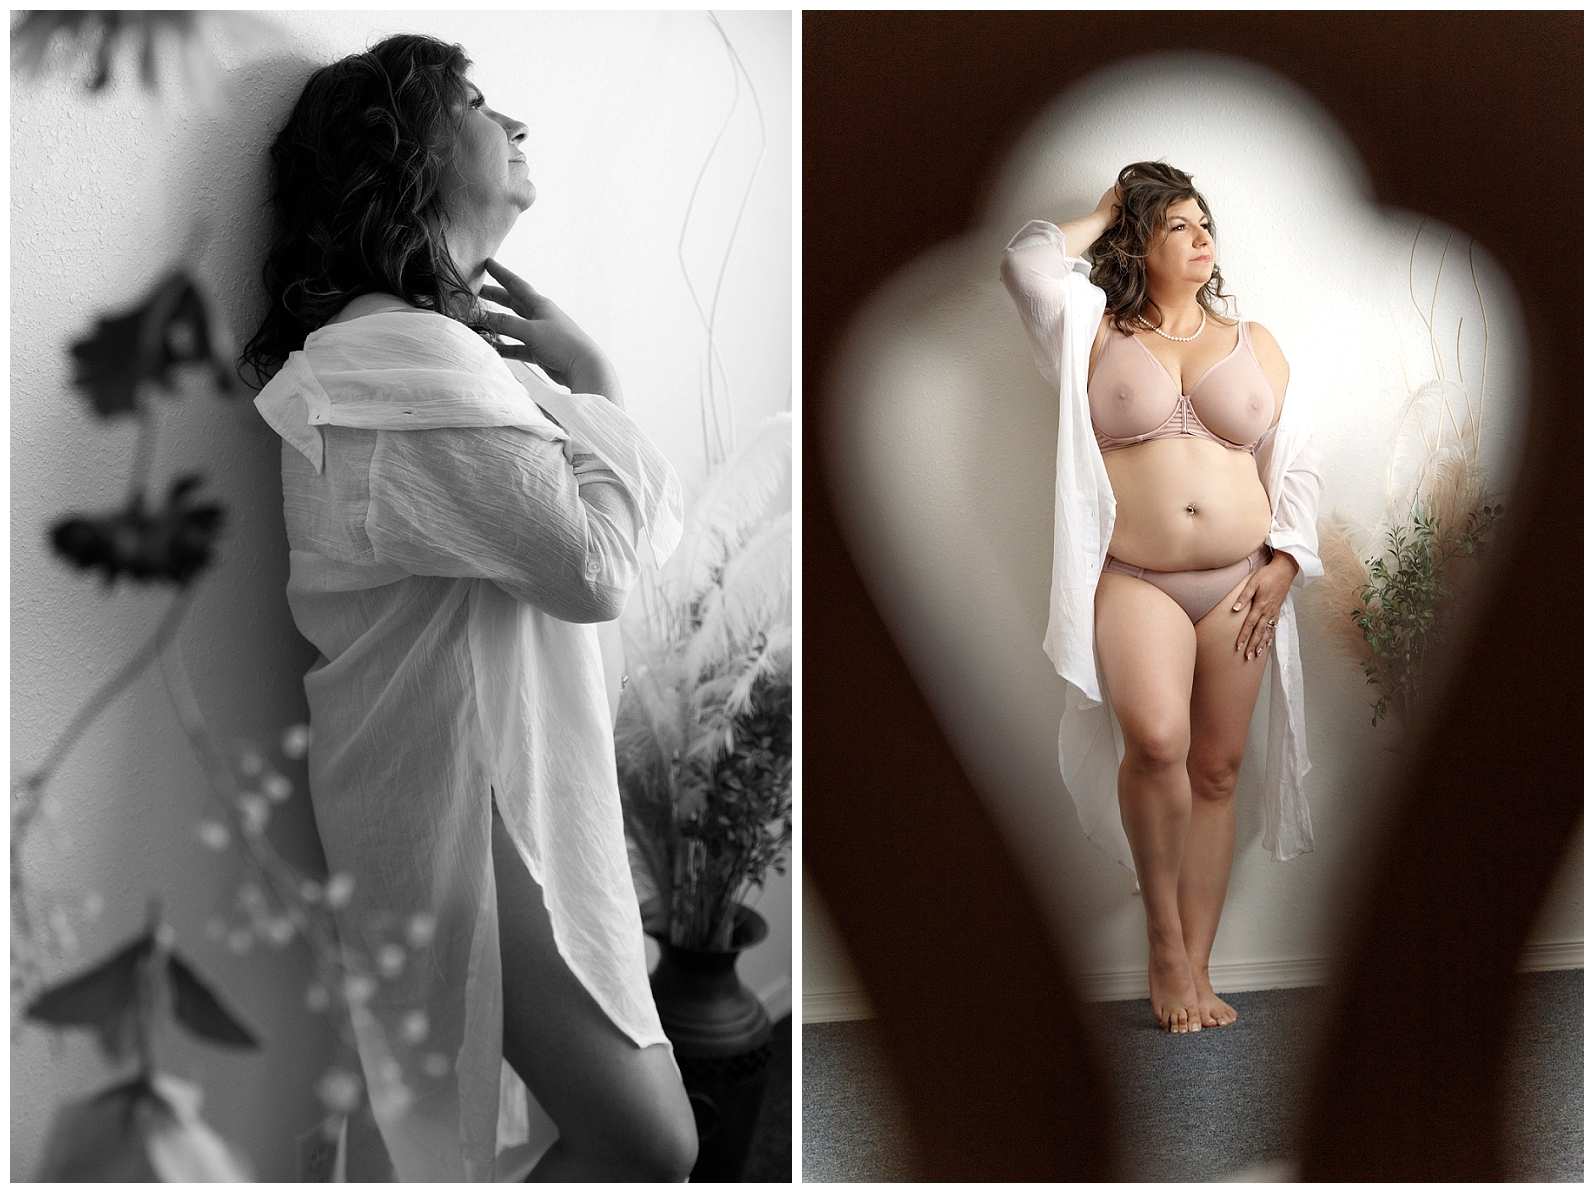 Confident and Empowered: A woman poses for a boudoir photoshoot, wearing a white shirt paired with a see-through bra. Her expression radiates self-assuredness and authenticity, celebrating her unique beauty